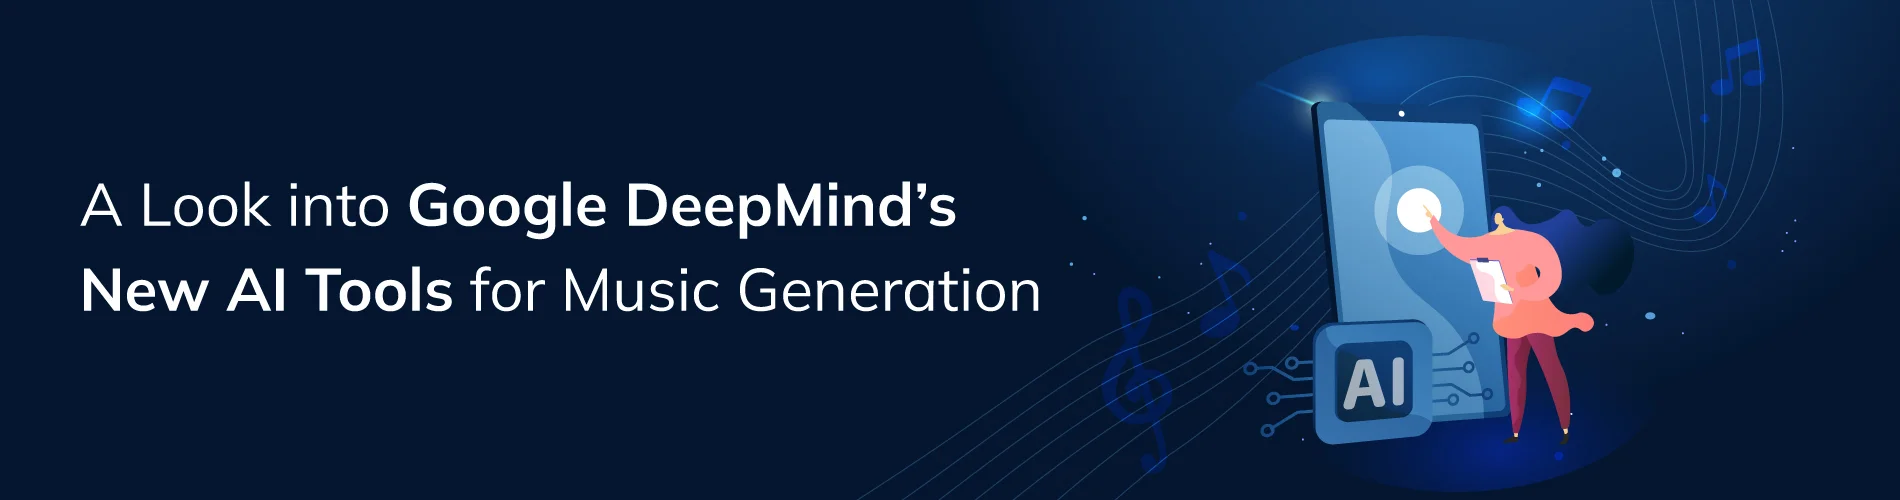 Look into Google DeepMind’s New AI Tools for Music Generation Lyria, SynthID, and Dream Track